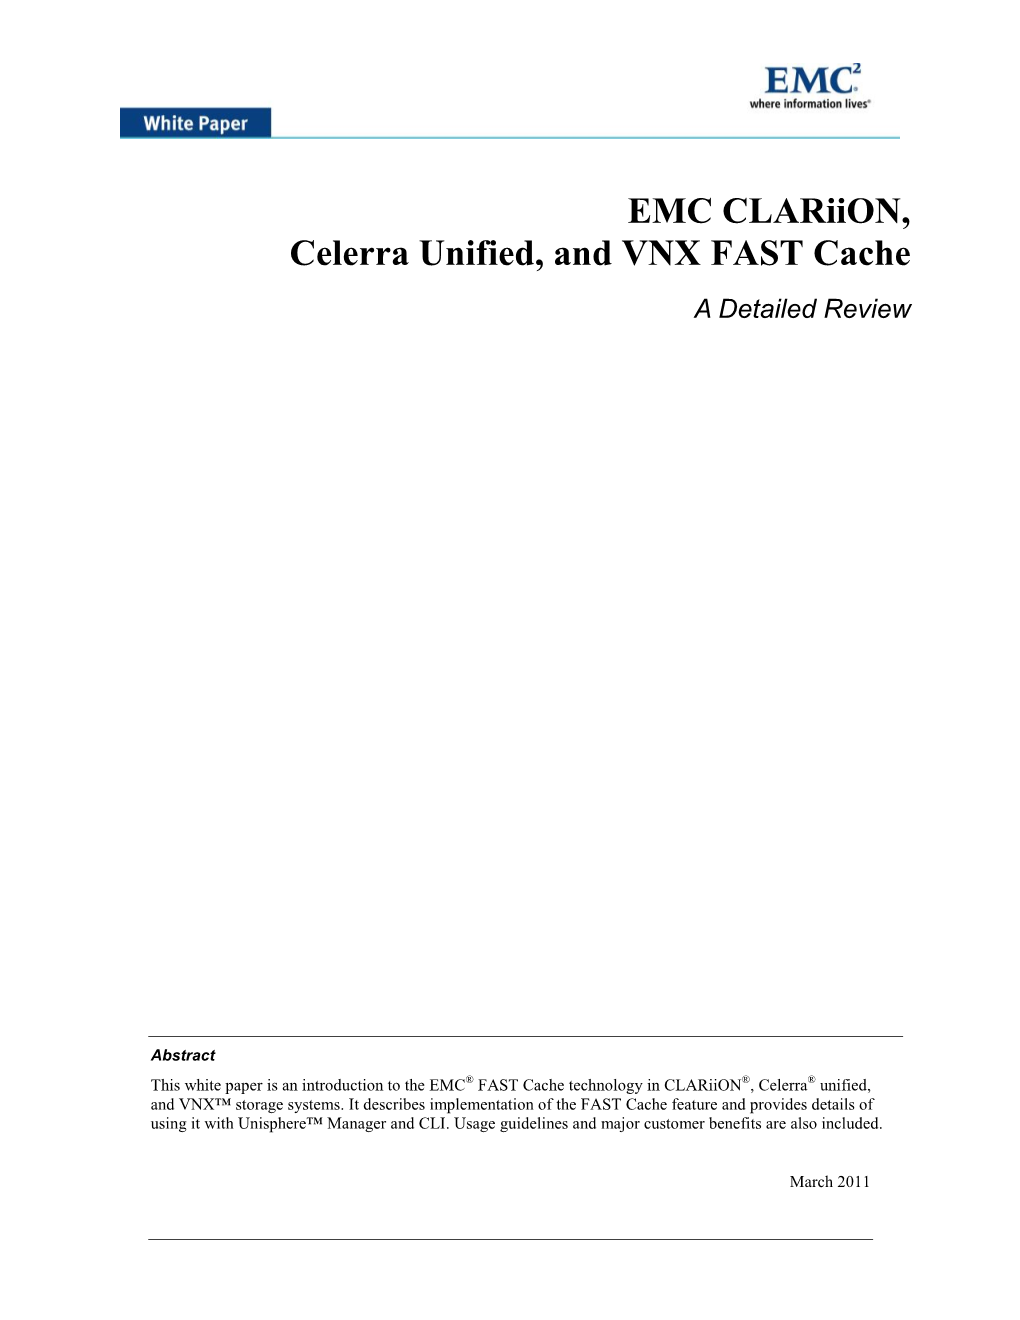 EMC Clariion, Celerra Unified, and FAST Cache